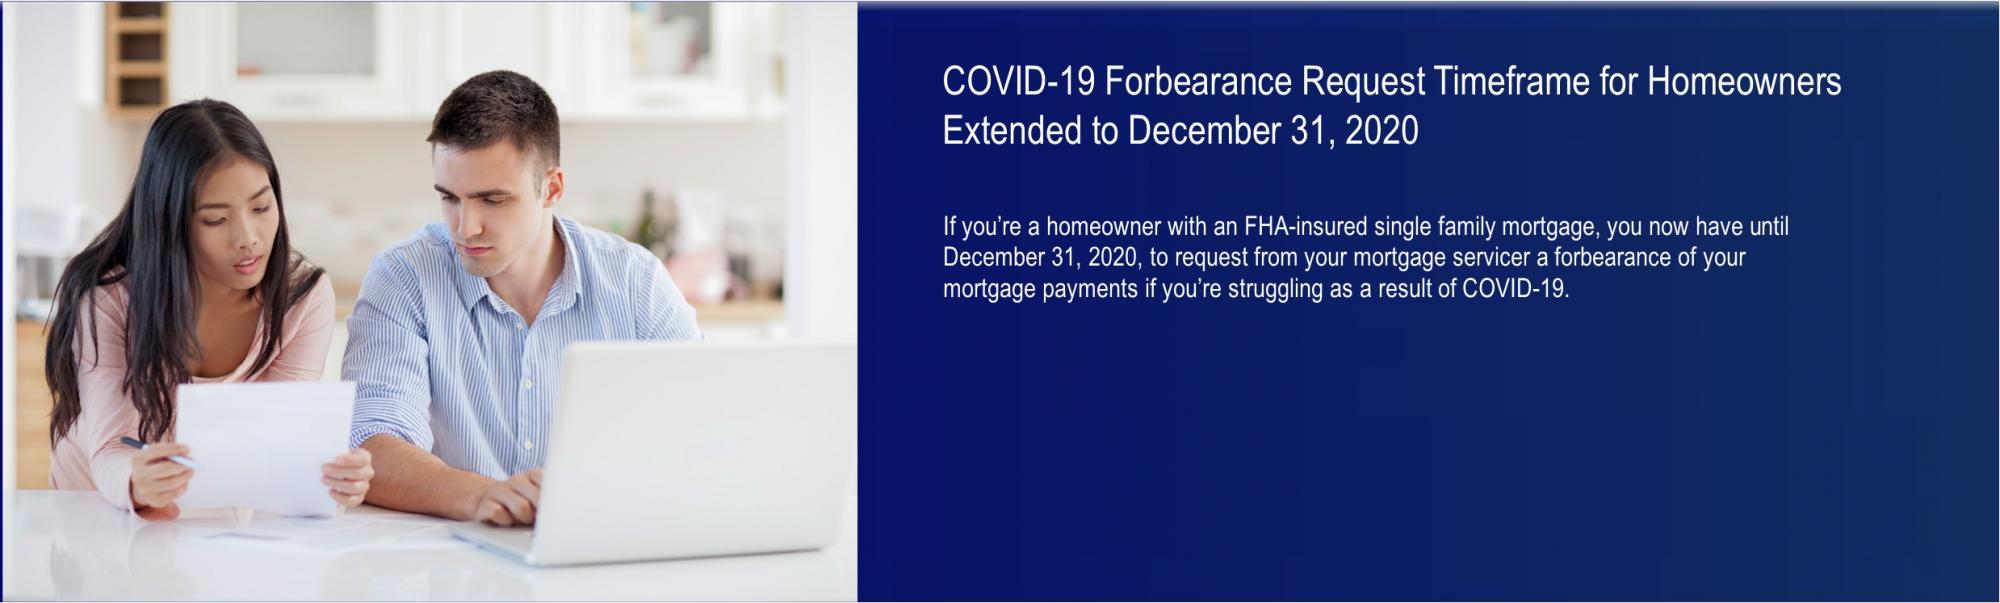 [COVID-19 Forbearance Request Timeframe for Homeowners Extended to December 31, 2020]. 